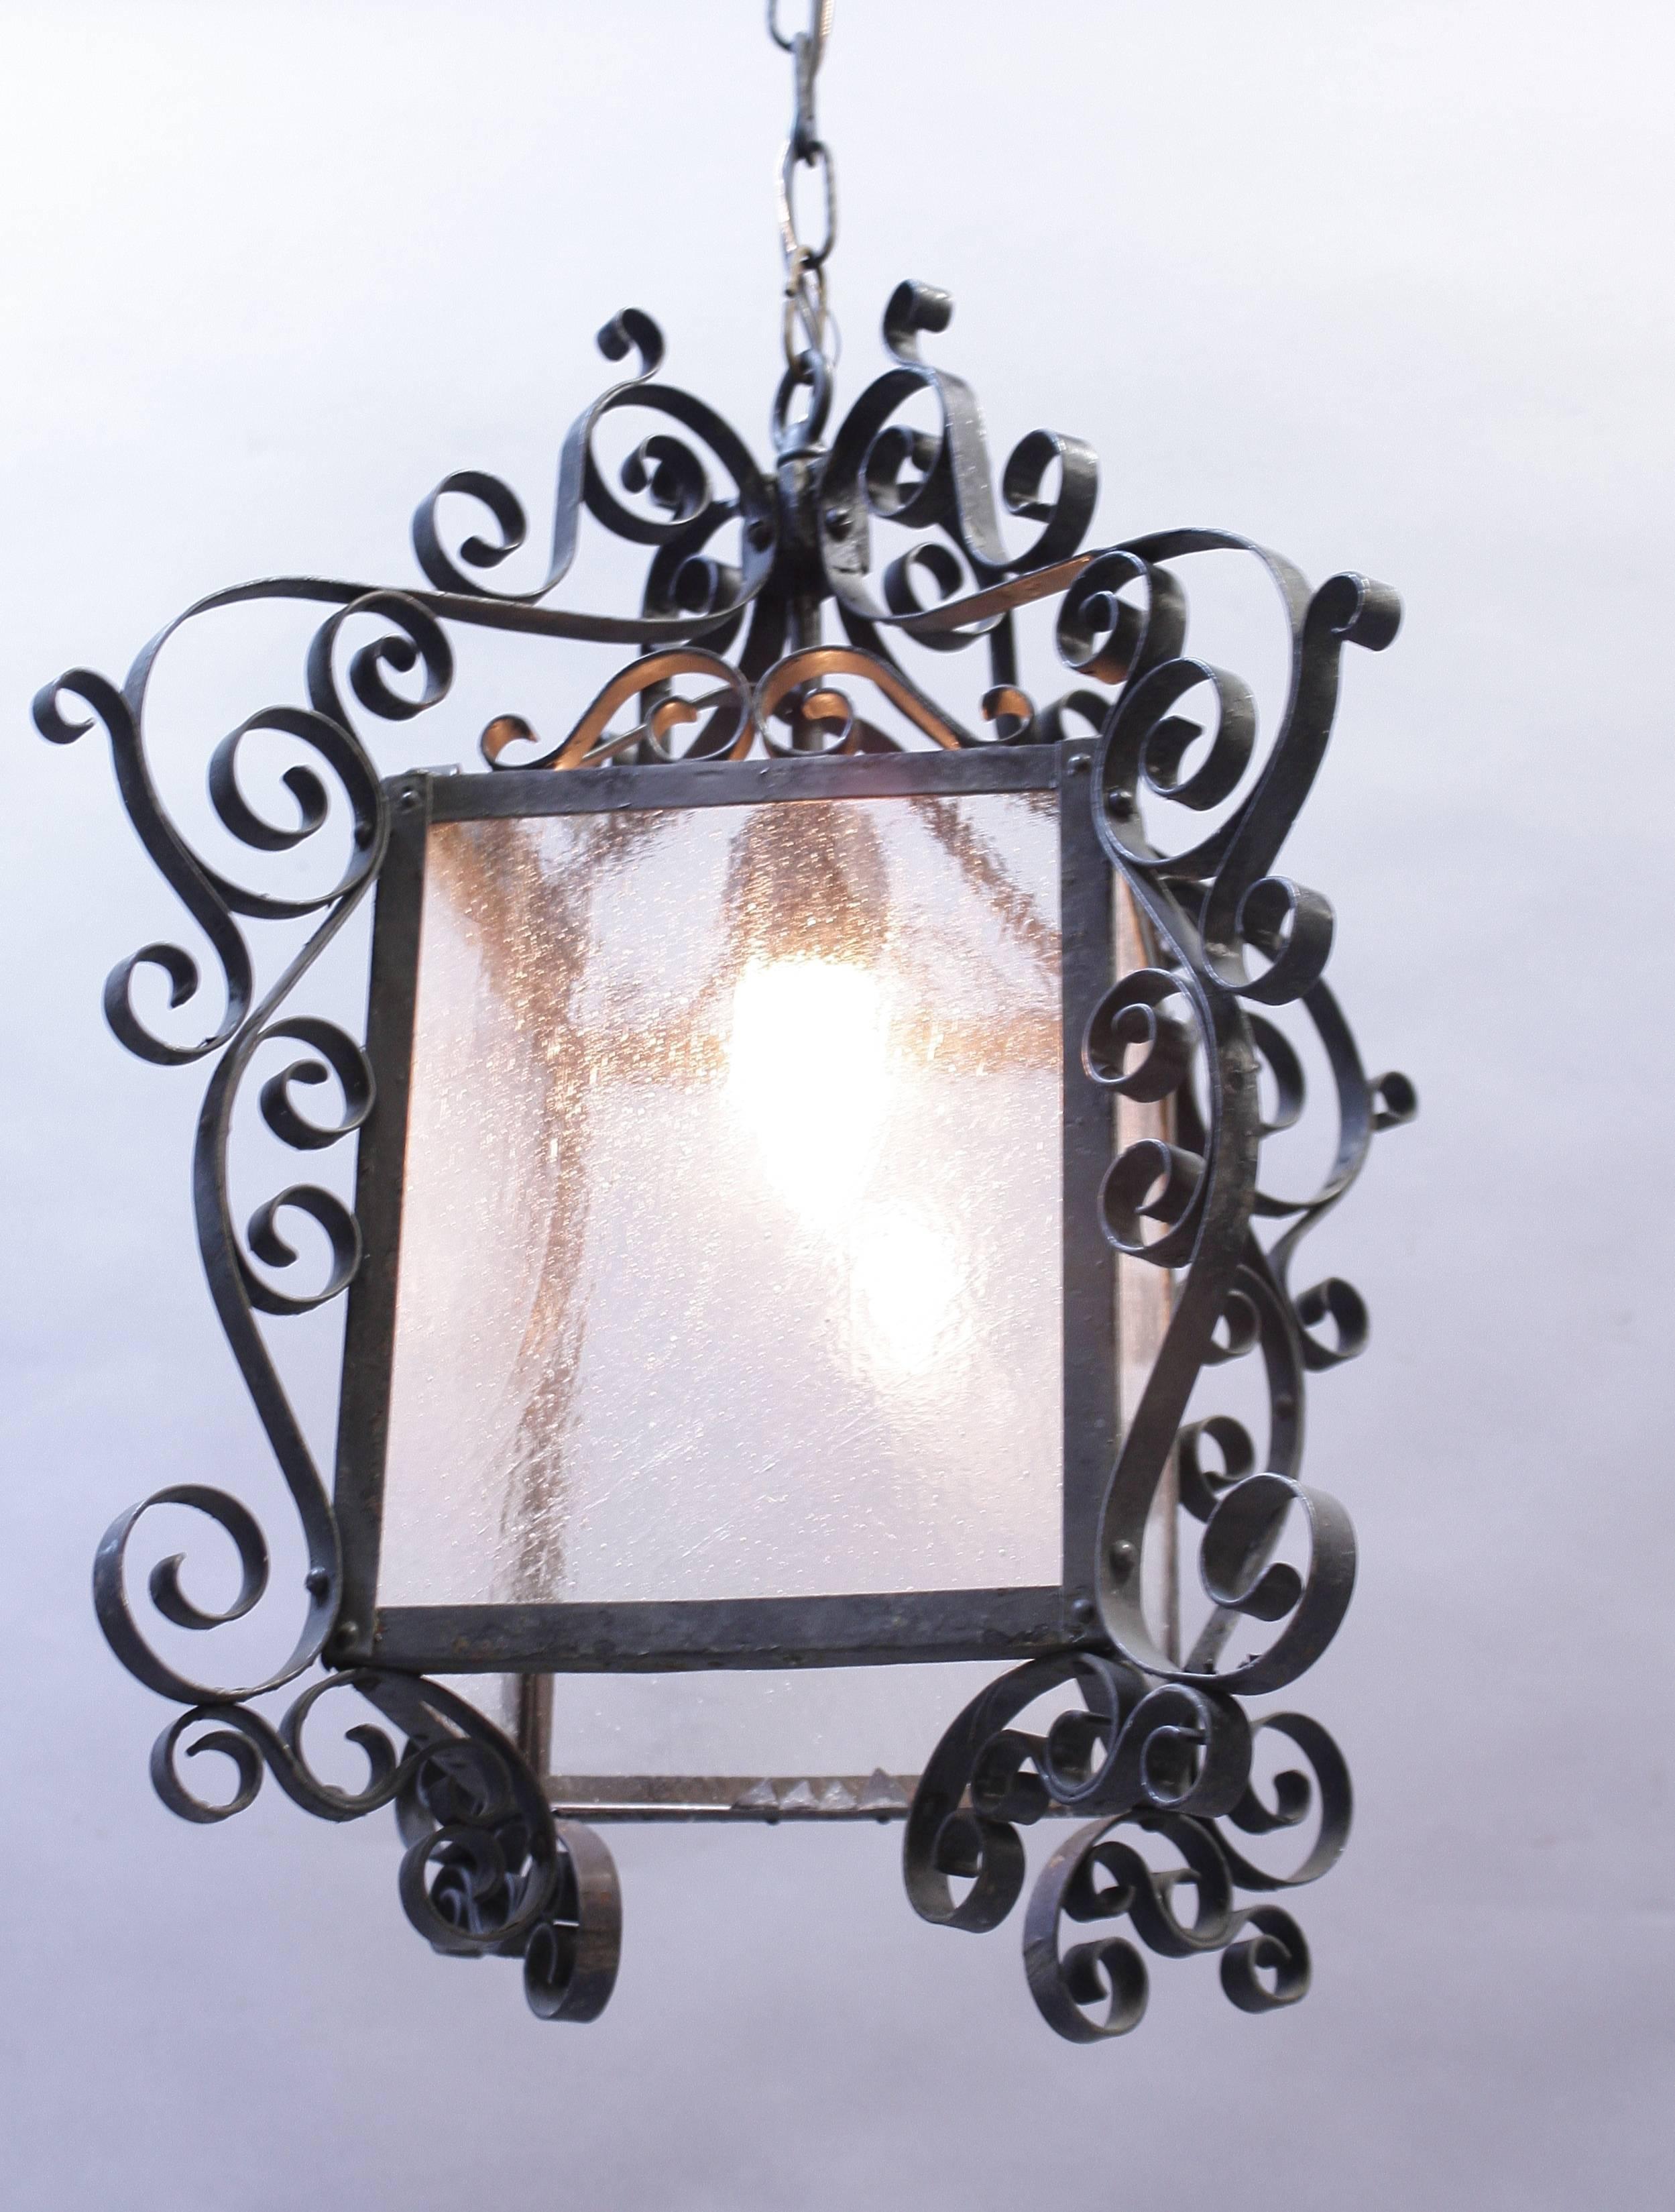 North American Antique 1920s Spanish Revival Lantern with Seeded Glass